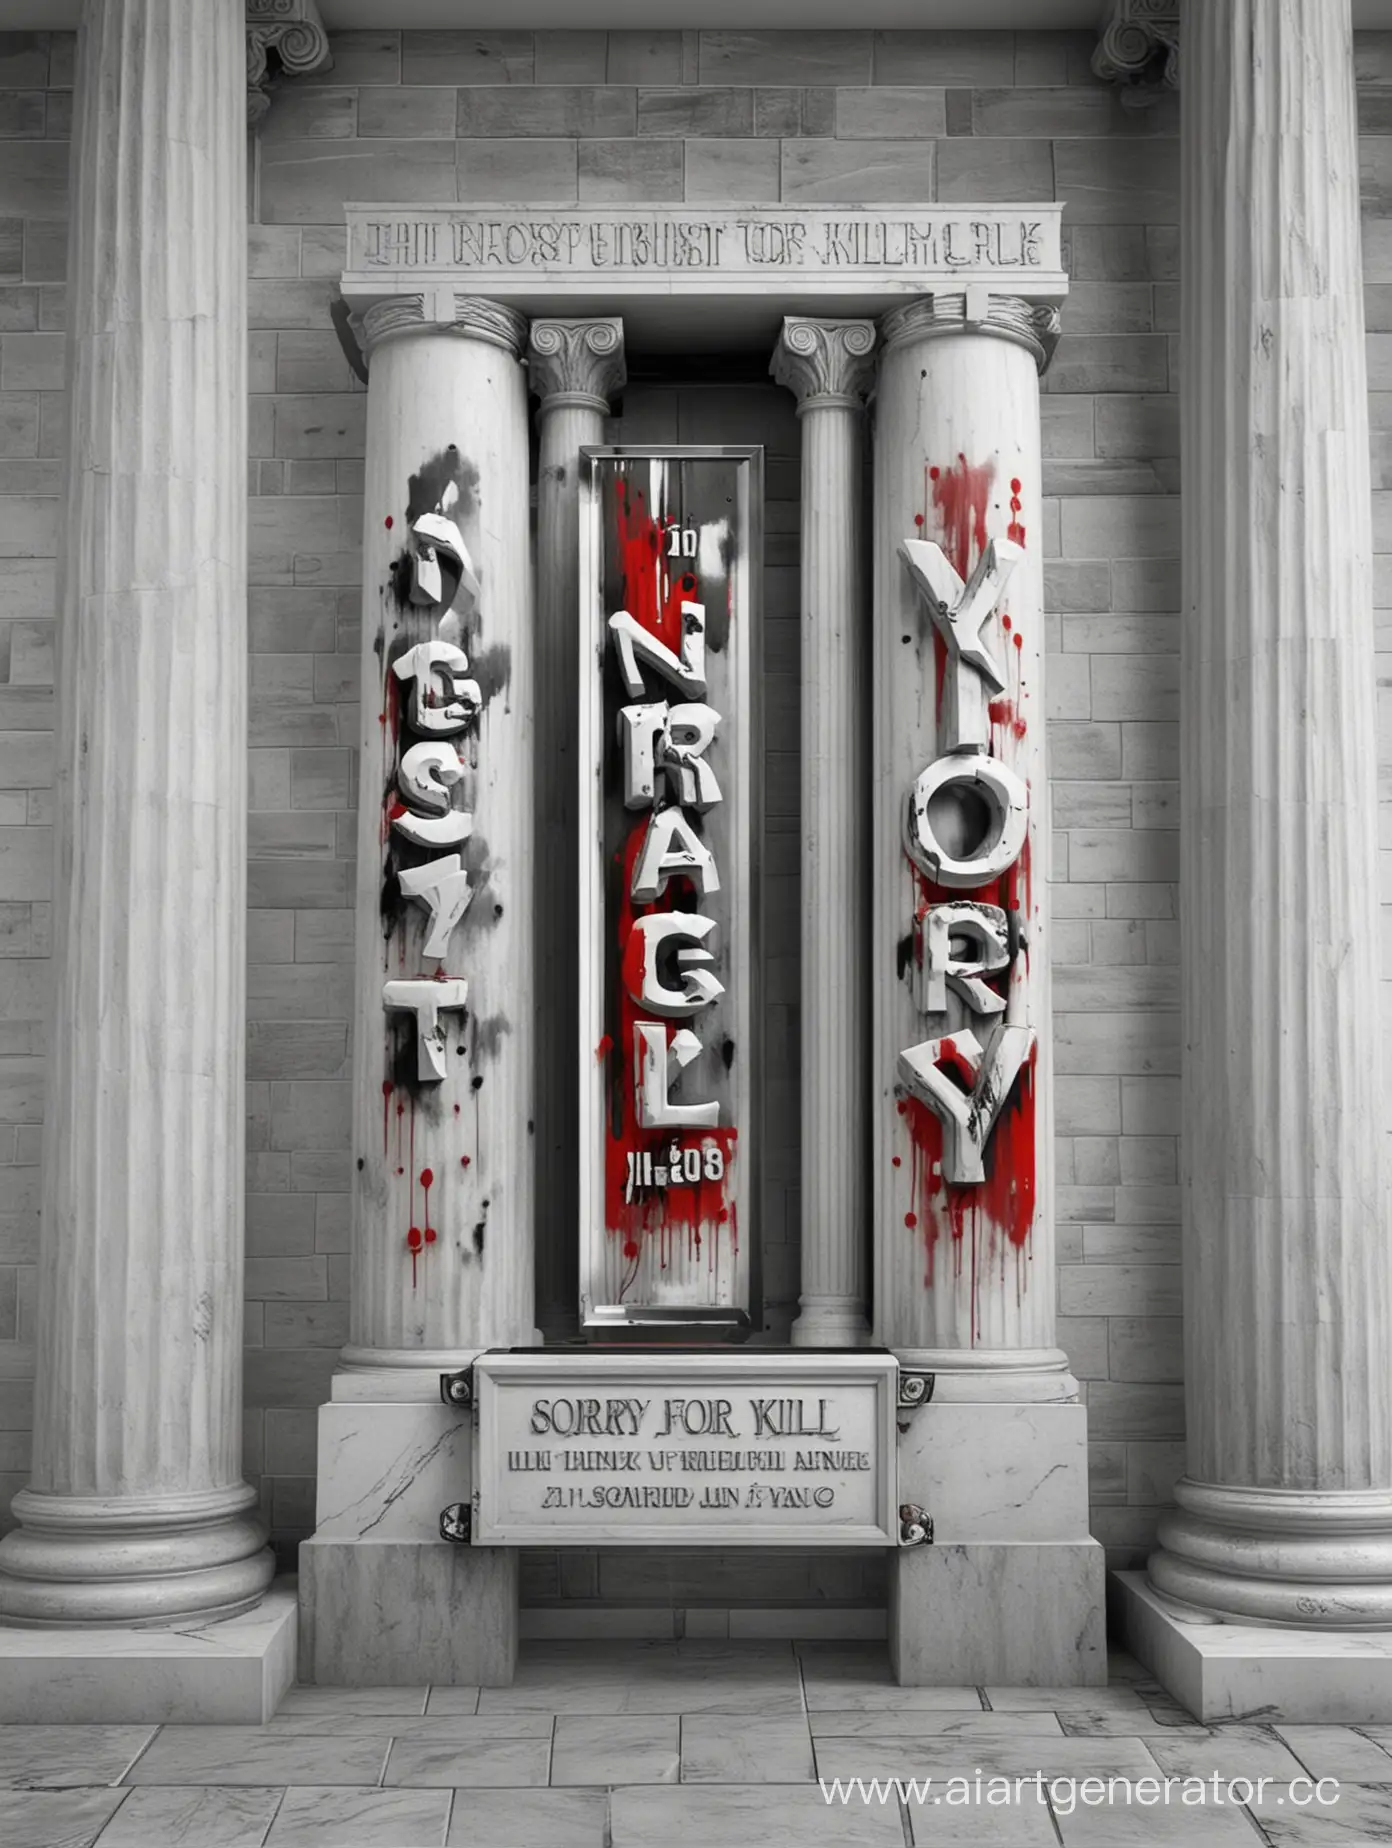 Monochrome-3D-Scene-with-Apologetic-Inscription-Between-Columns